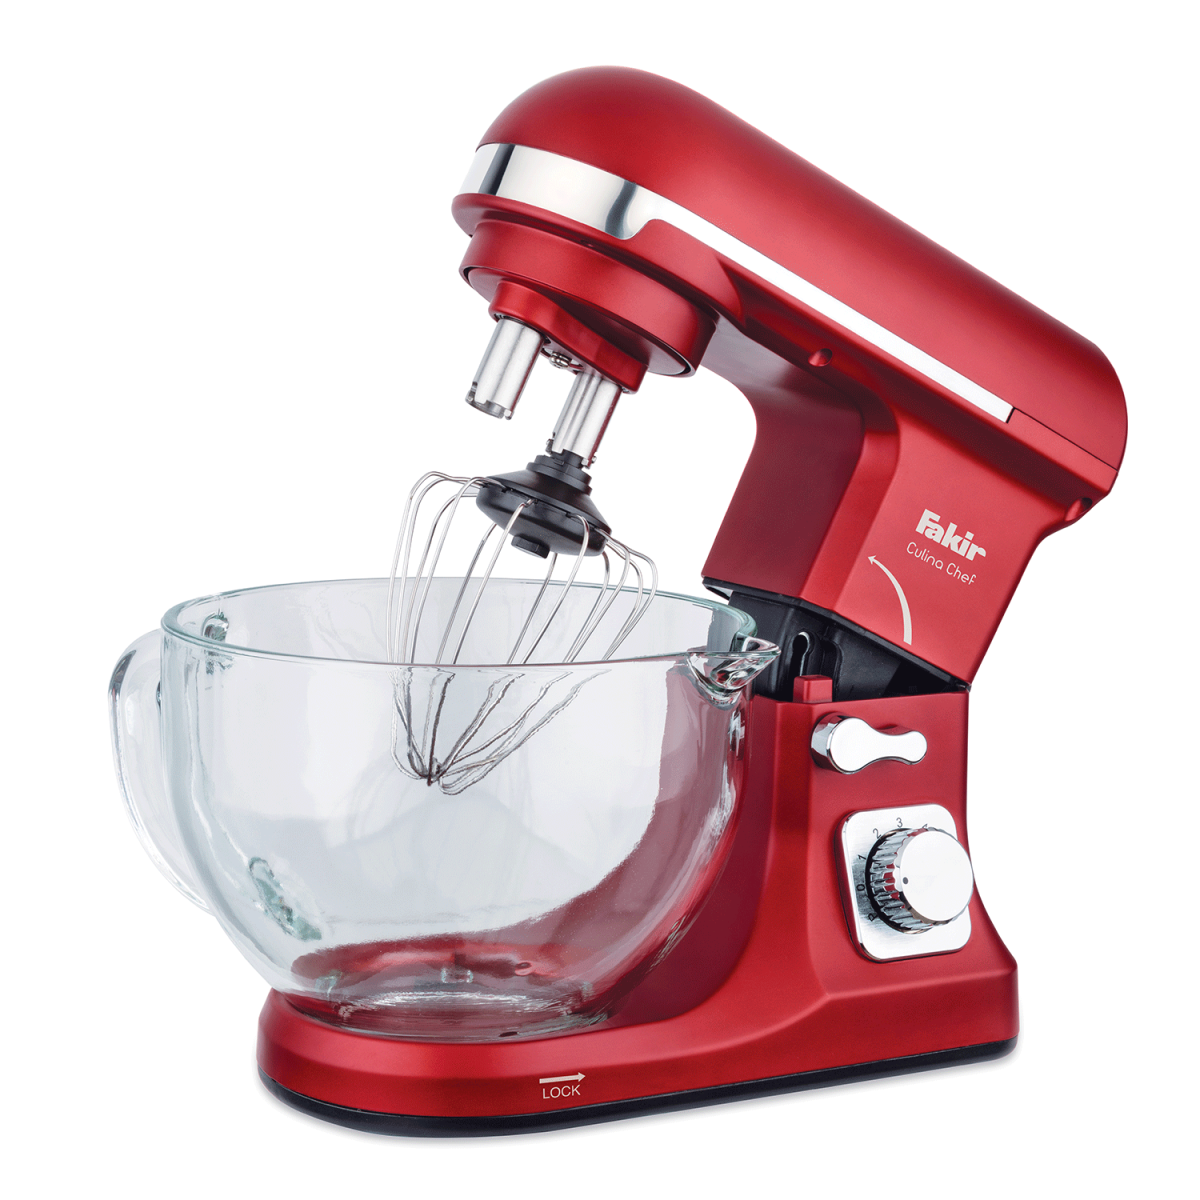 Fakir Culina Chef Stand Mixer Rouge